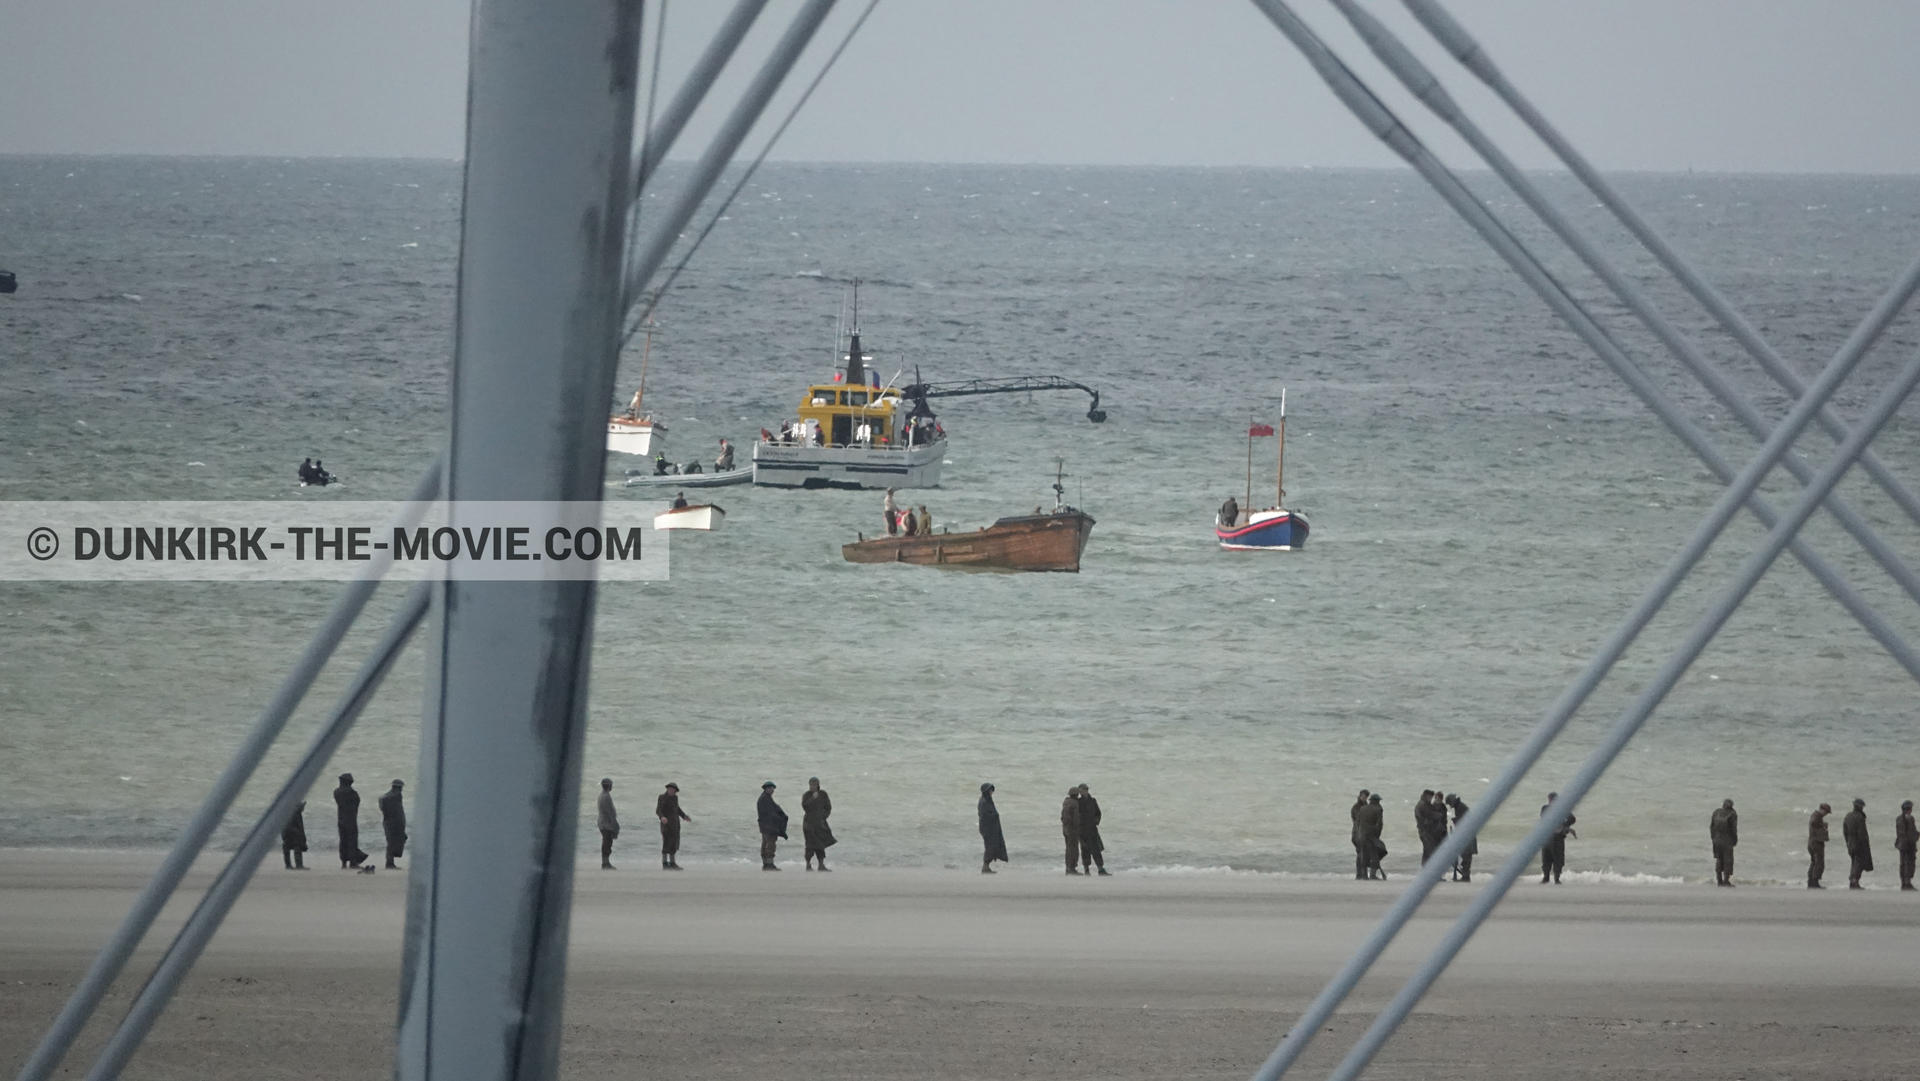 Picture with boat, Ocean Wind 4, beach, Henry Finlay lifeboat,  from behind the scene of the Dunkirk movie by Nolan